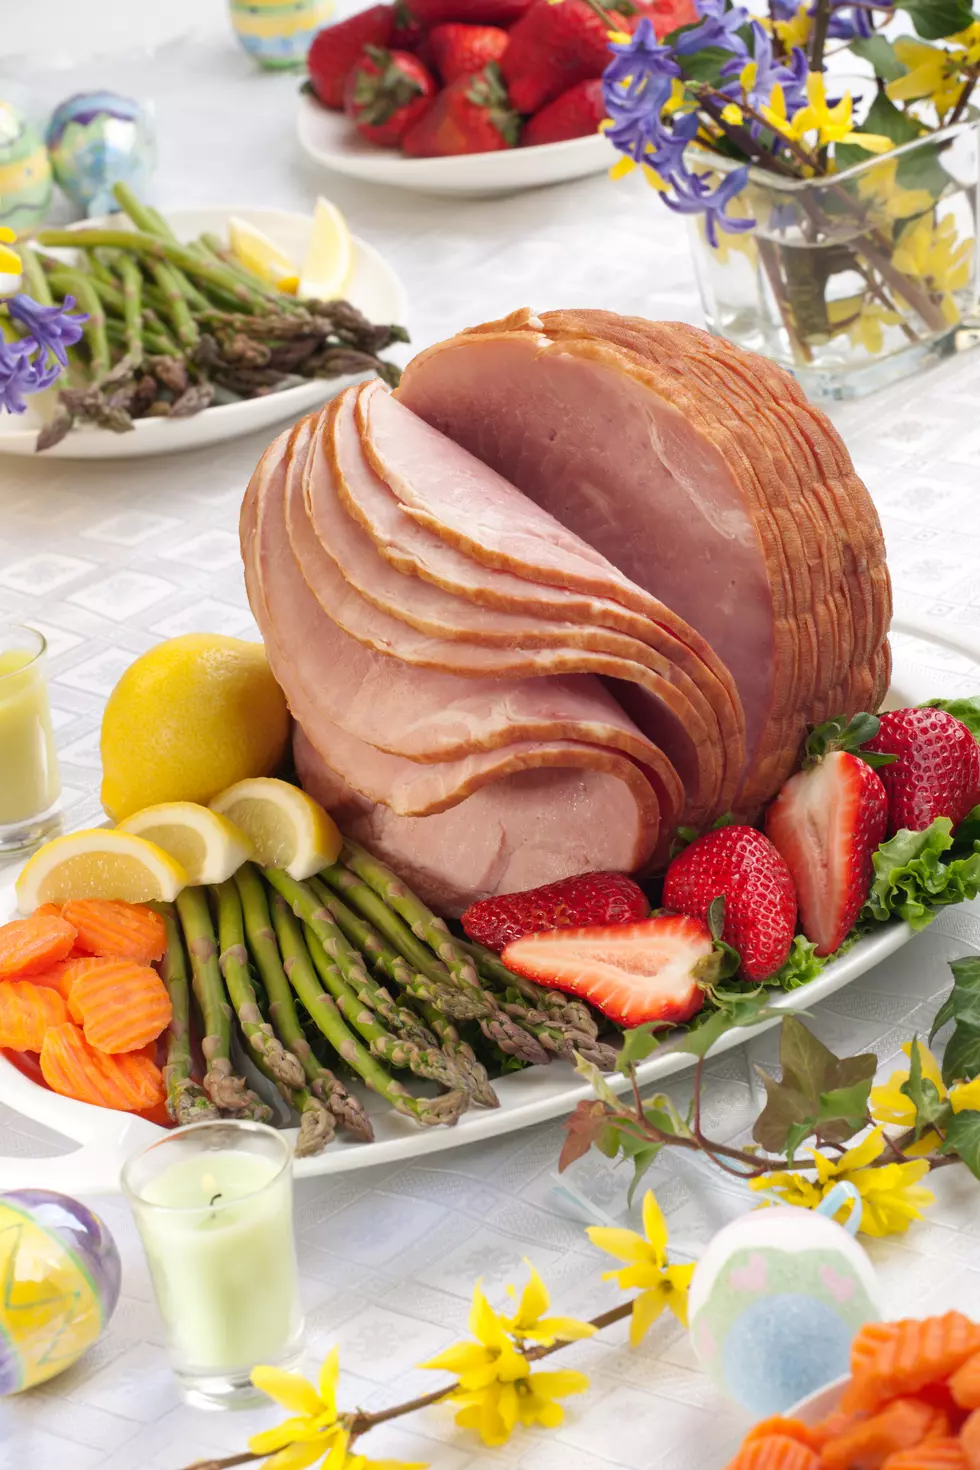 How Many Calories Did New Englanders Eat at Easter Dinner?